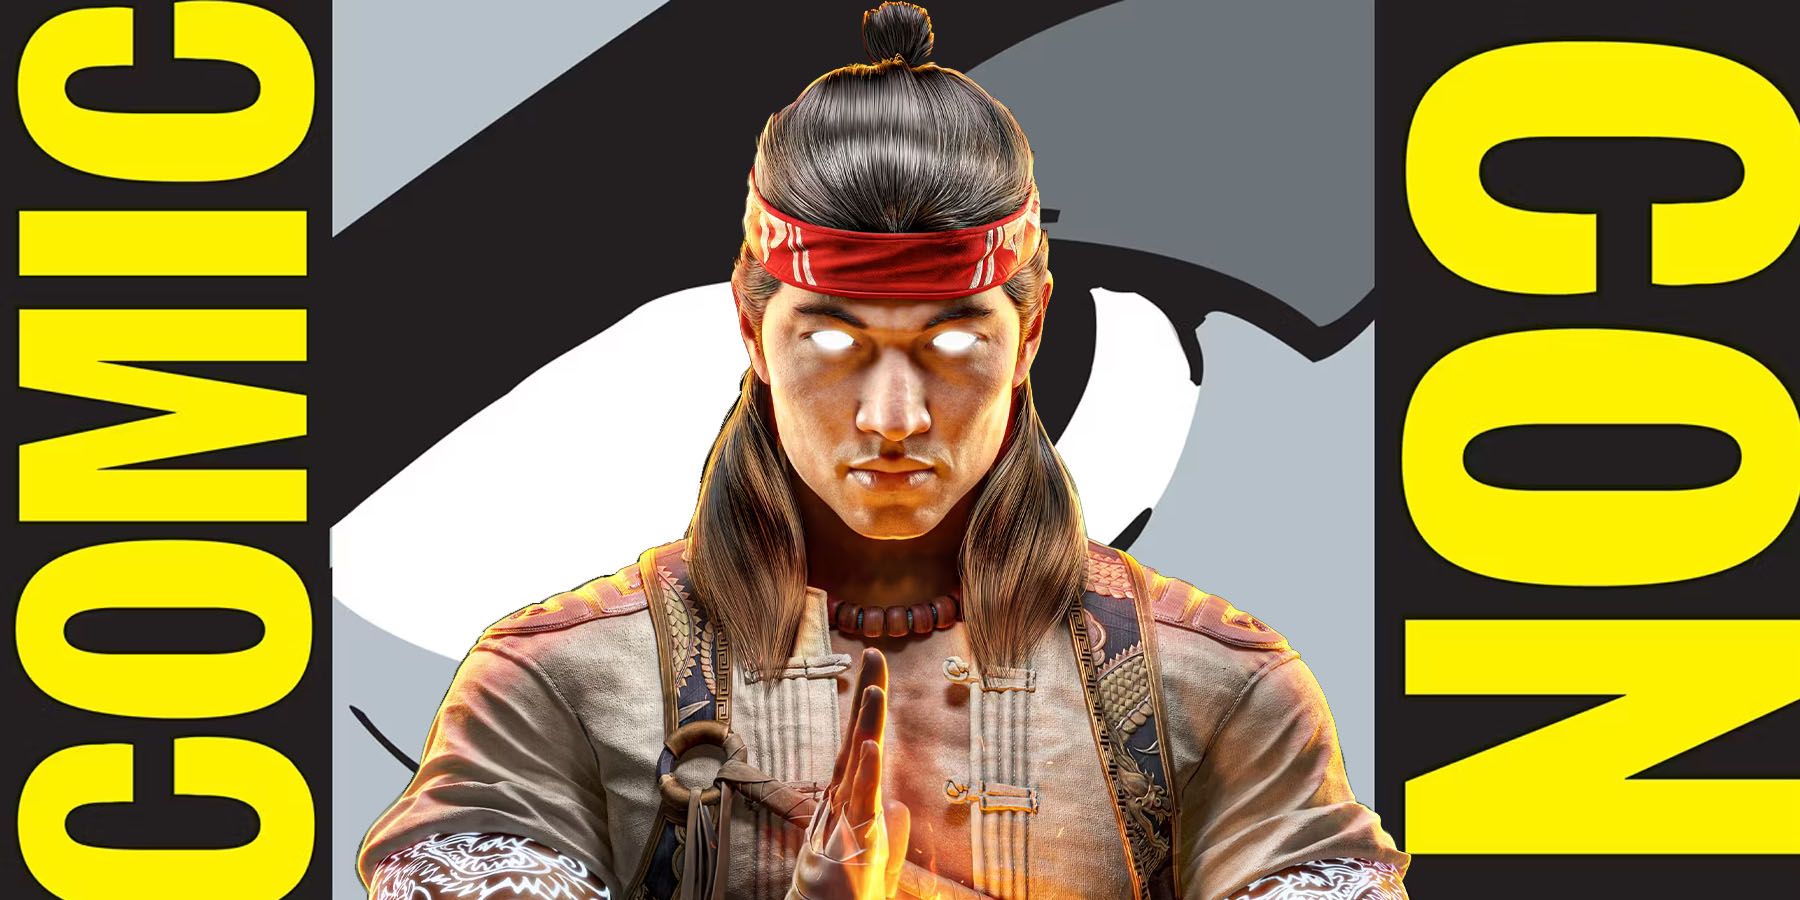 An image of Mortal Kombat 1's Liu Kang standing in front of the Comic-Con logo.